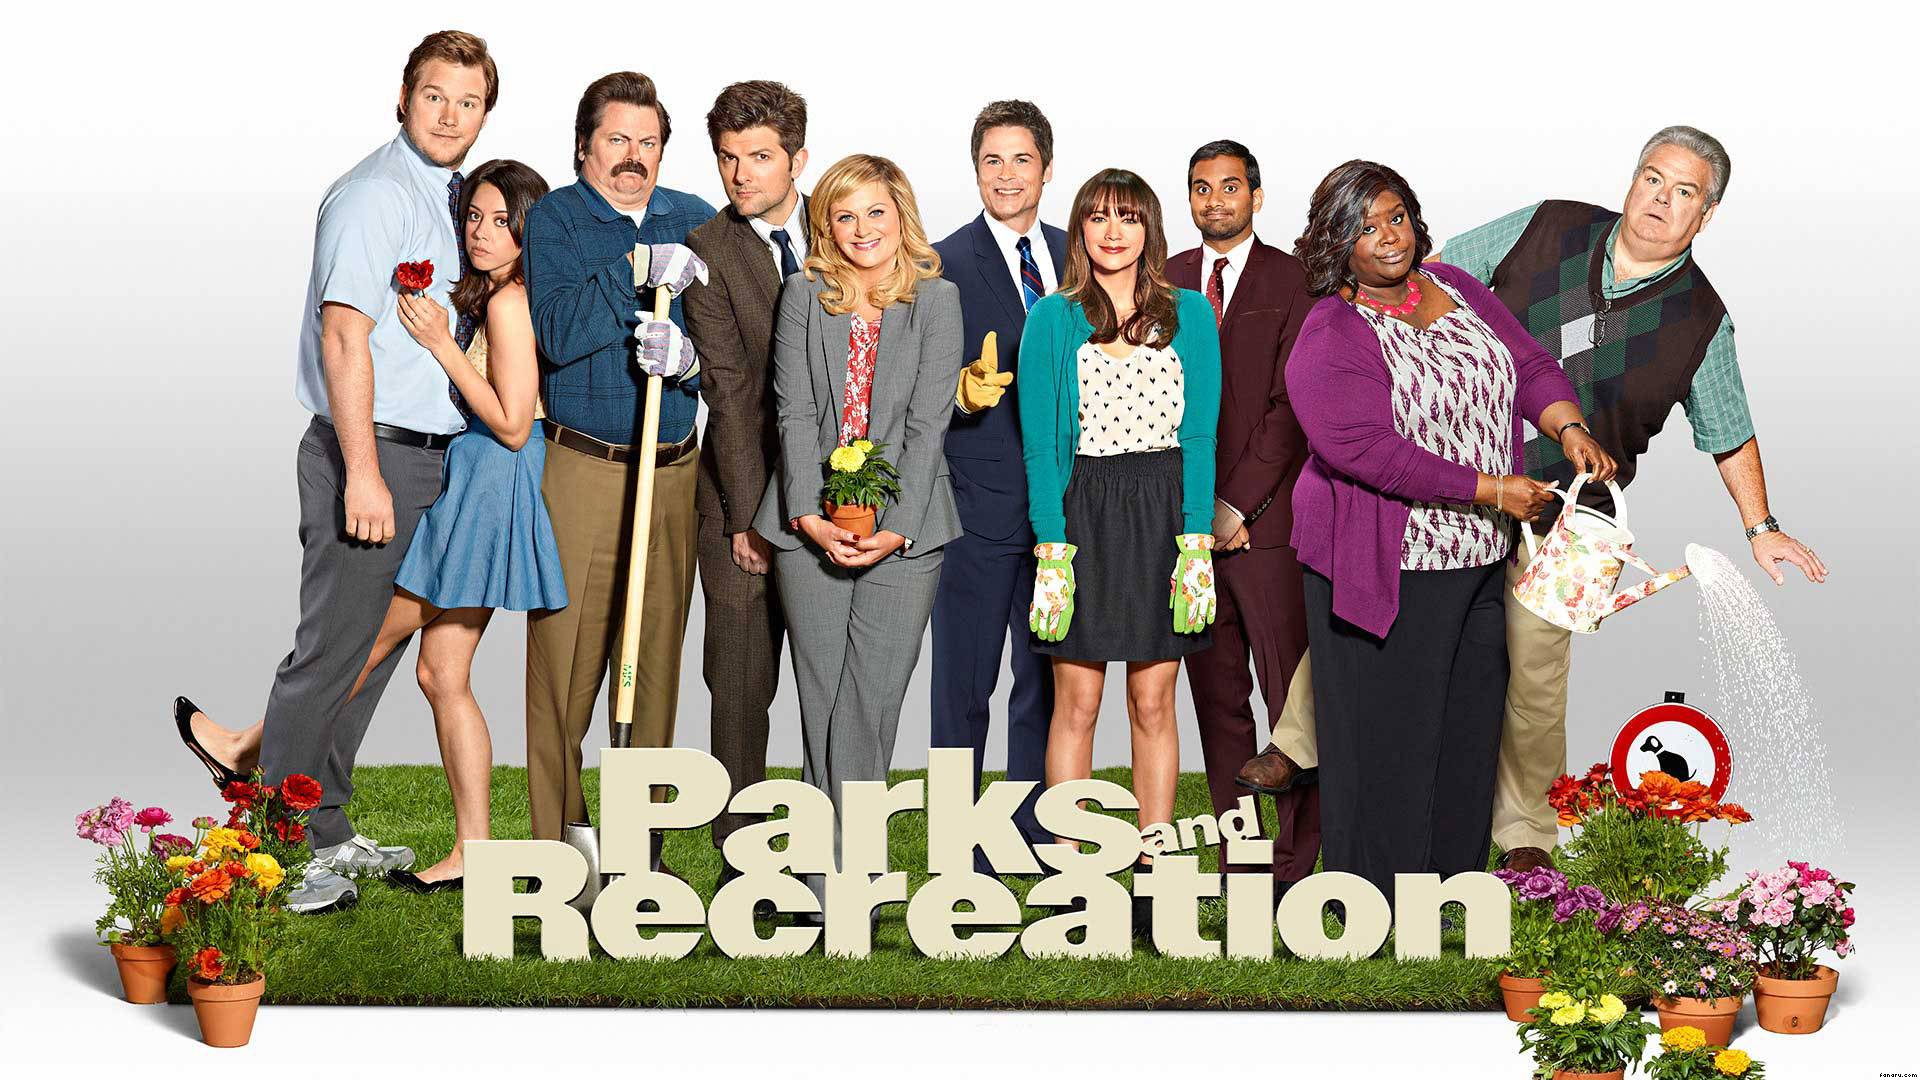 Parks And Recreation Wallpaper, Amazing 100% Quality HD Parks